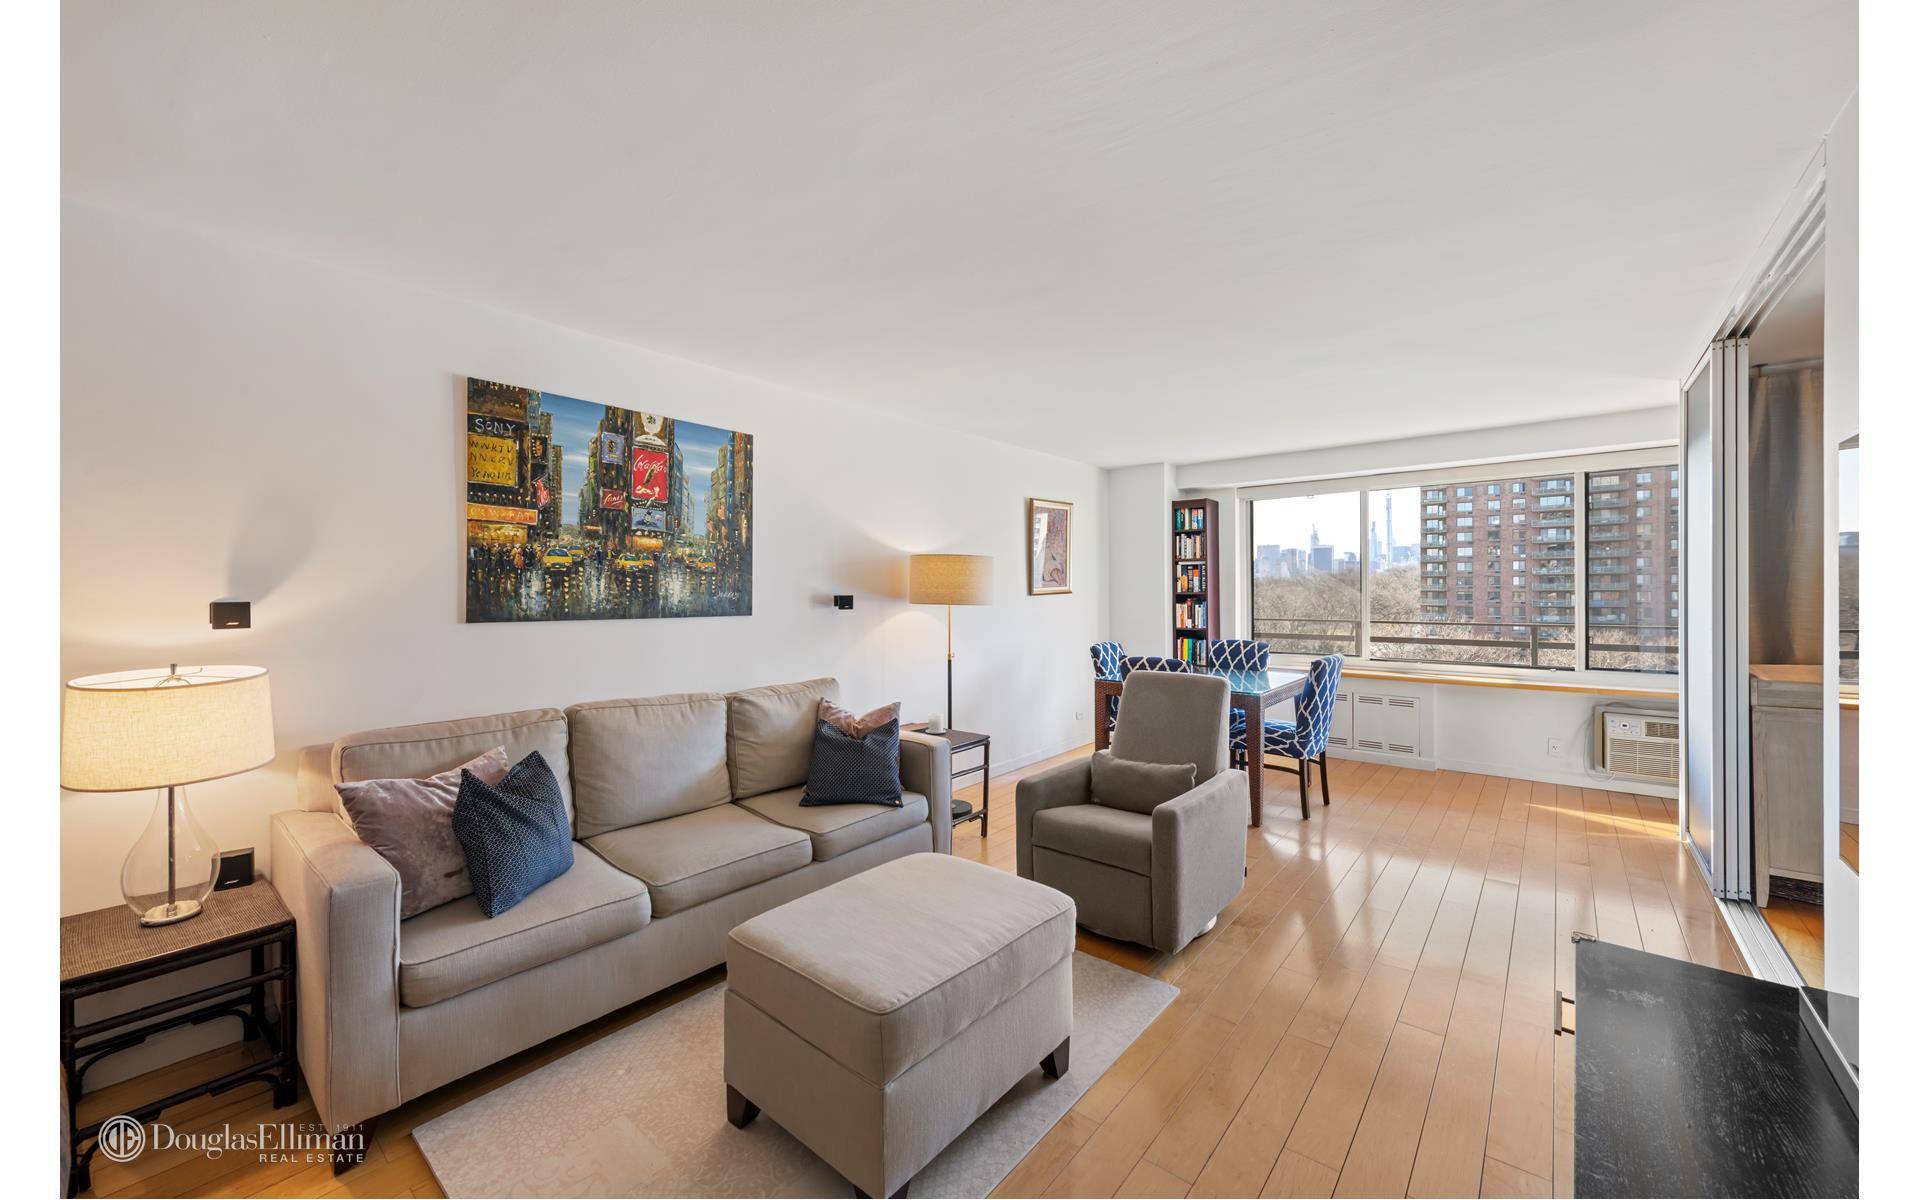 Live on the Park. Luxurious renovations throughout this postwar condominium apartment originated from Architects Skidmore, Owings amp ; Merrill.